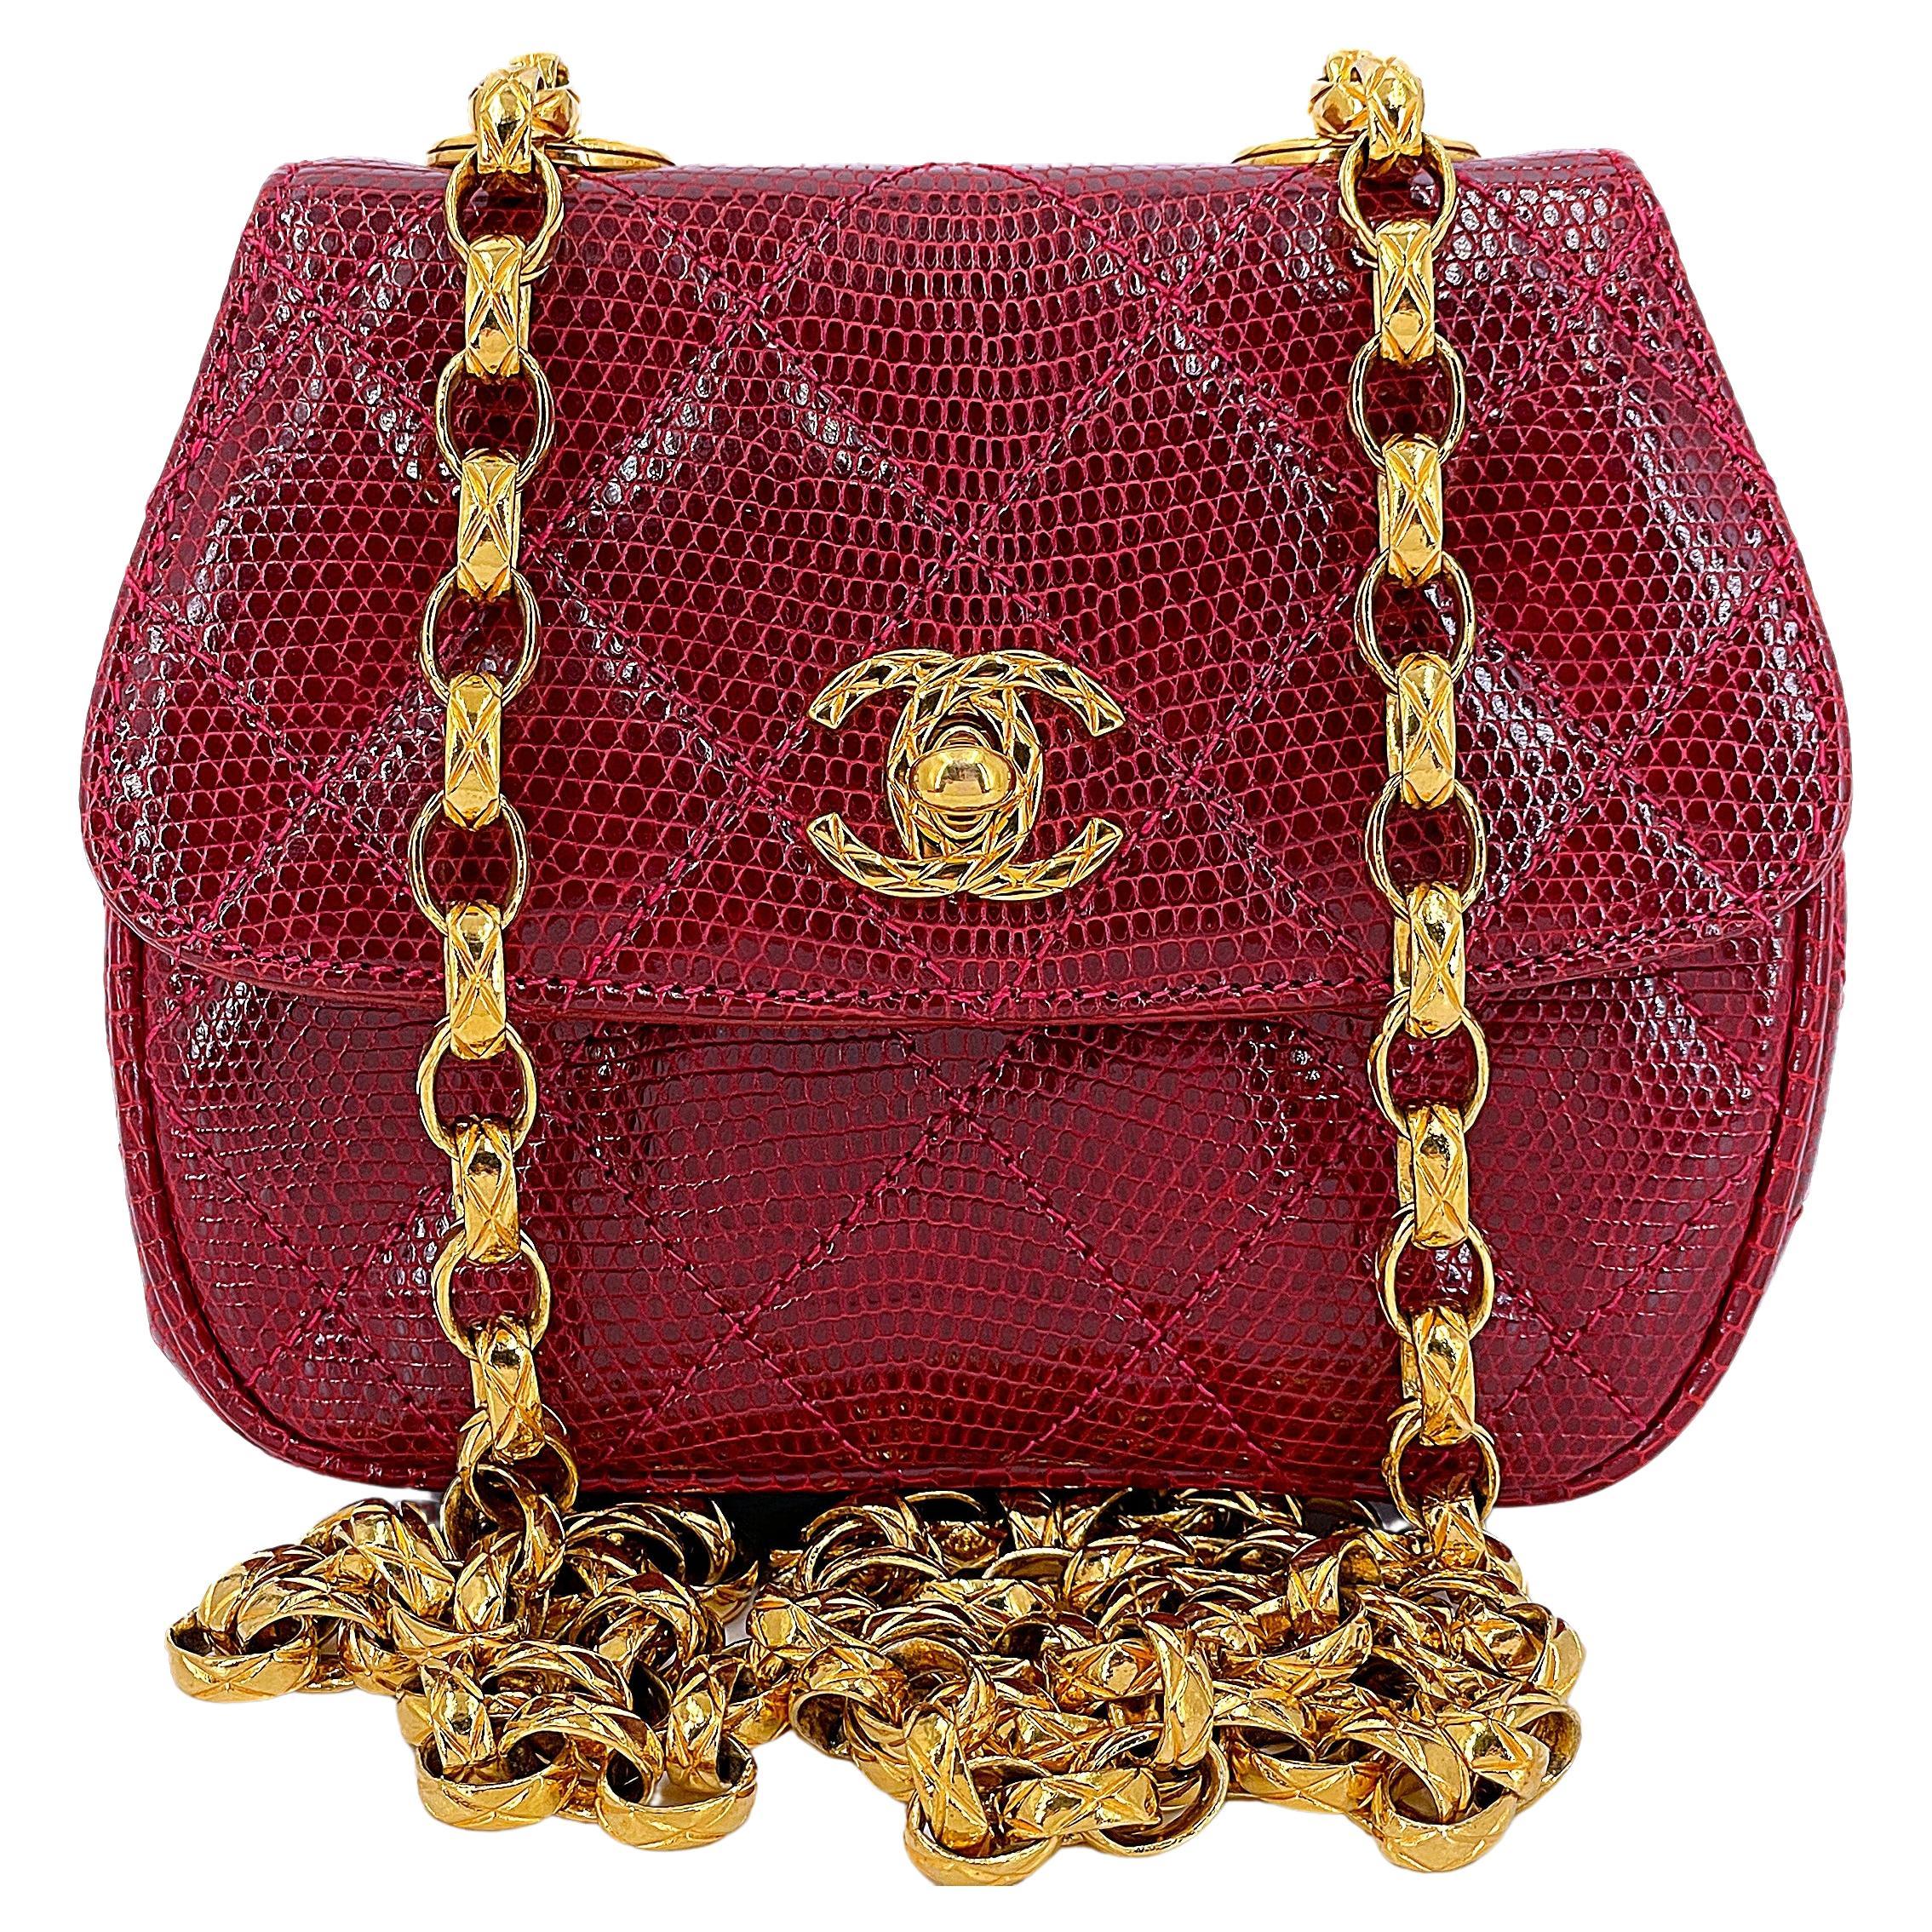 Rare Chanel 1980s Vintage Red Lizard Etched Chain Round Mini Flap Bag 67290